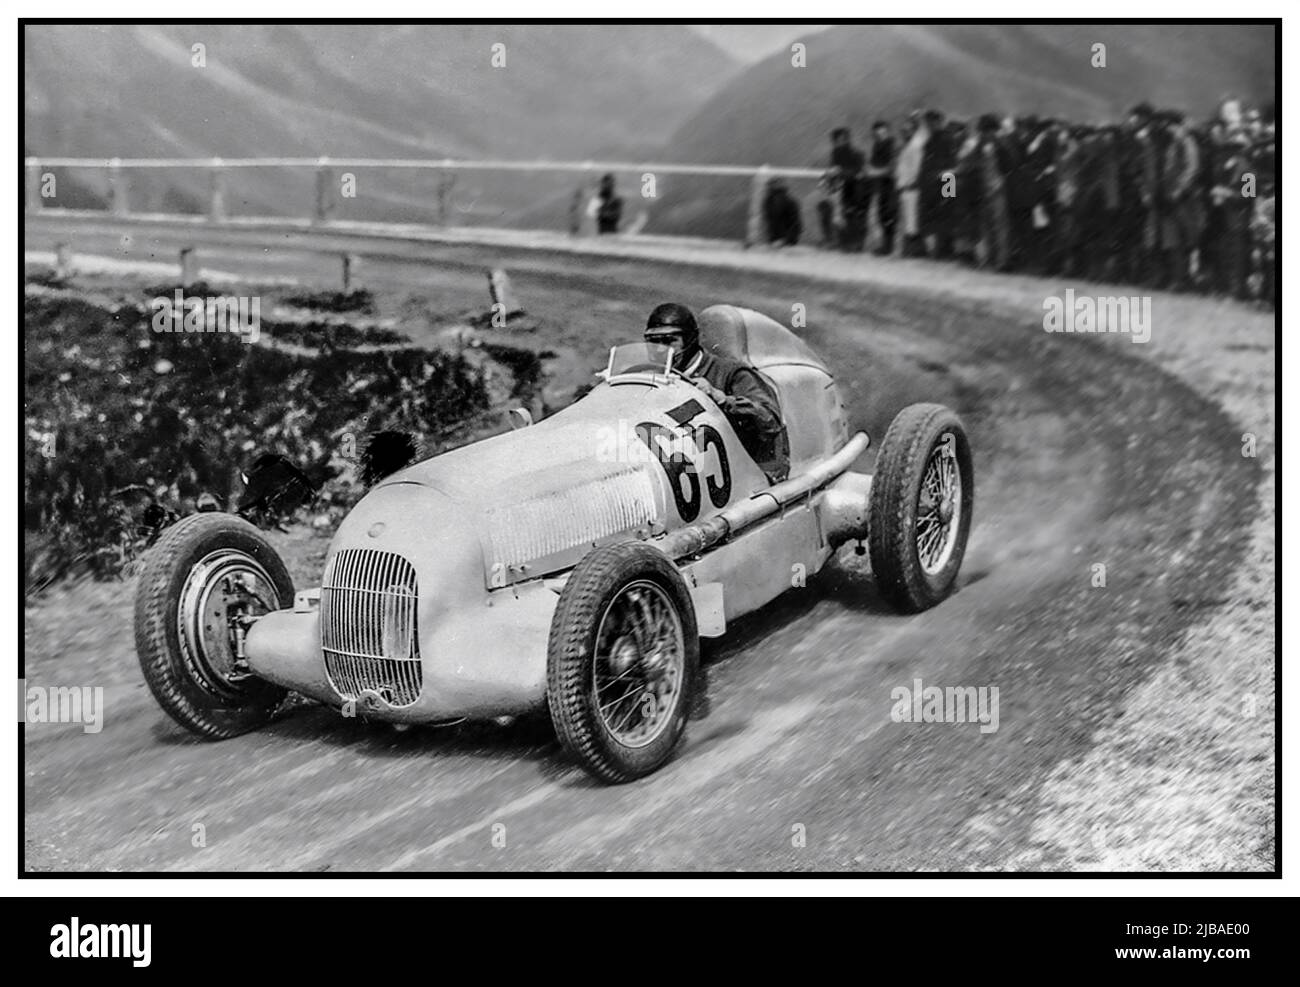 CARACCIOLA MERCEDES WINNER KLAUSEN HILL CLIMB 1934  Vintage 1930s Mercedes Silver Arrow 1934 1934, Rudolf Caracciola driving the Mercedes-Benz W25 to victory in 1934 W25 car number 65 Klausen Hill Climb Rudolf Caracciola’s record-breaking time of 15:22.20 minutes, Stock Photo